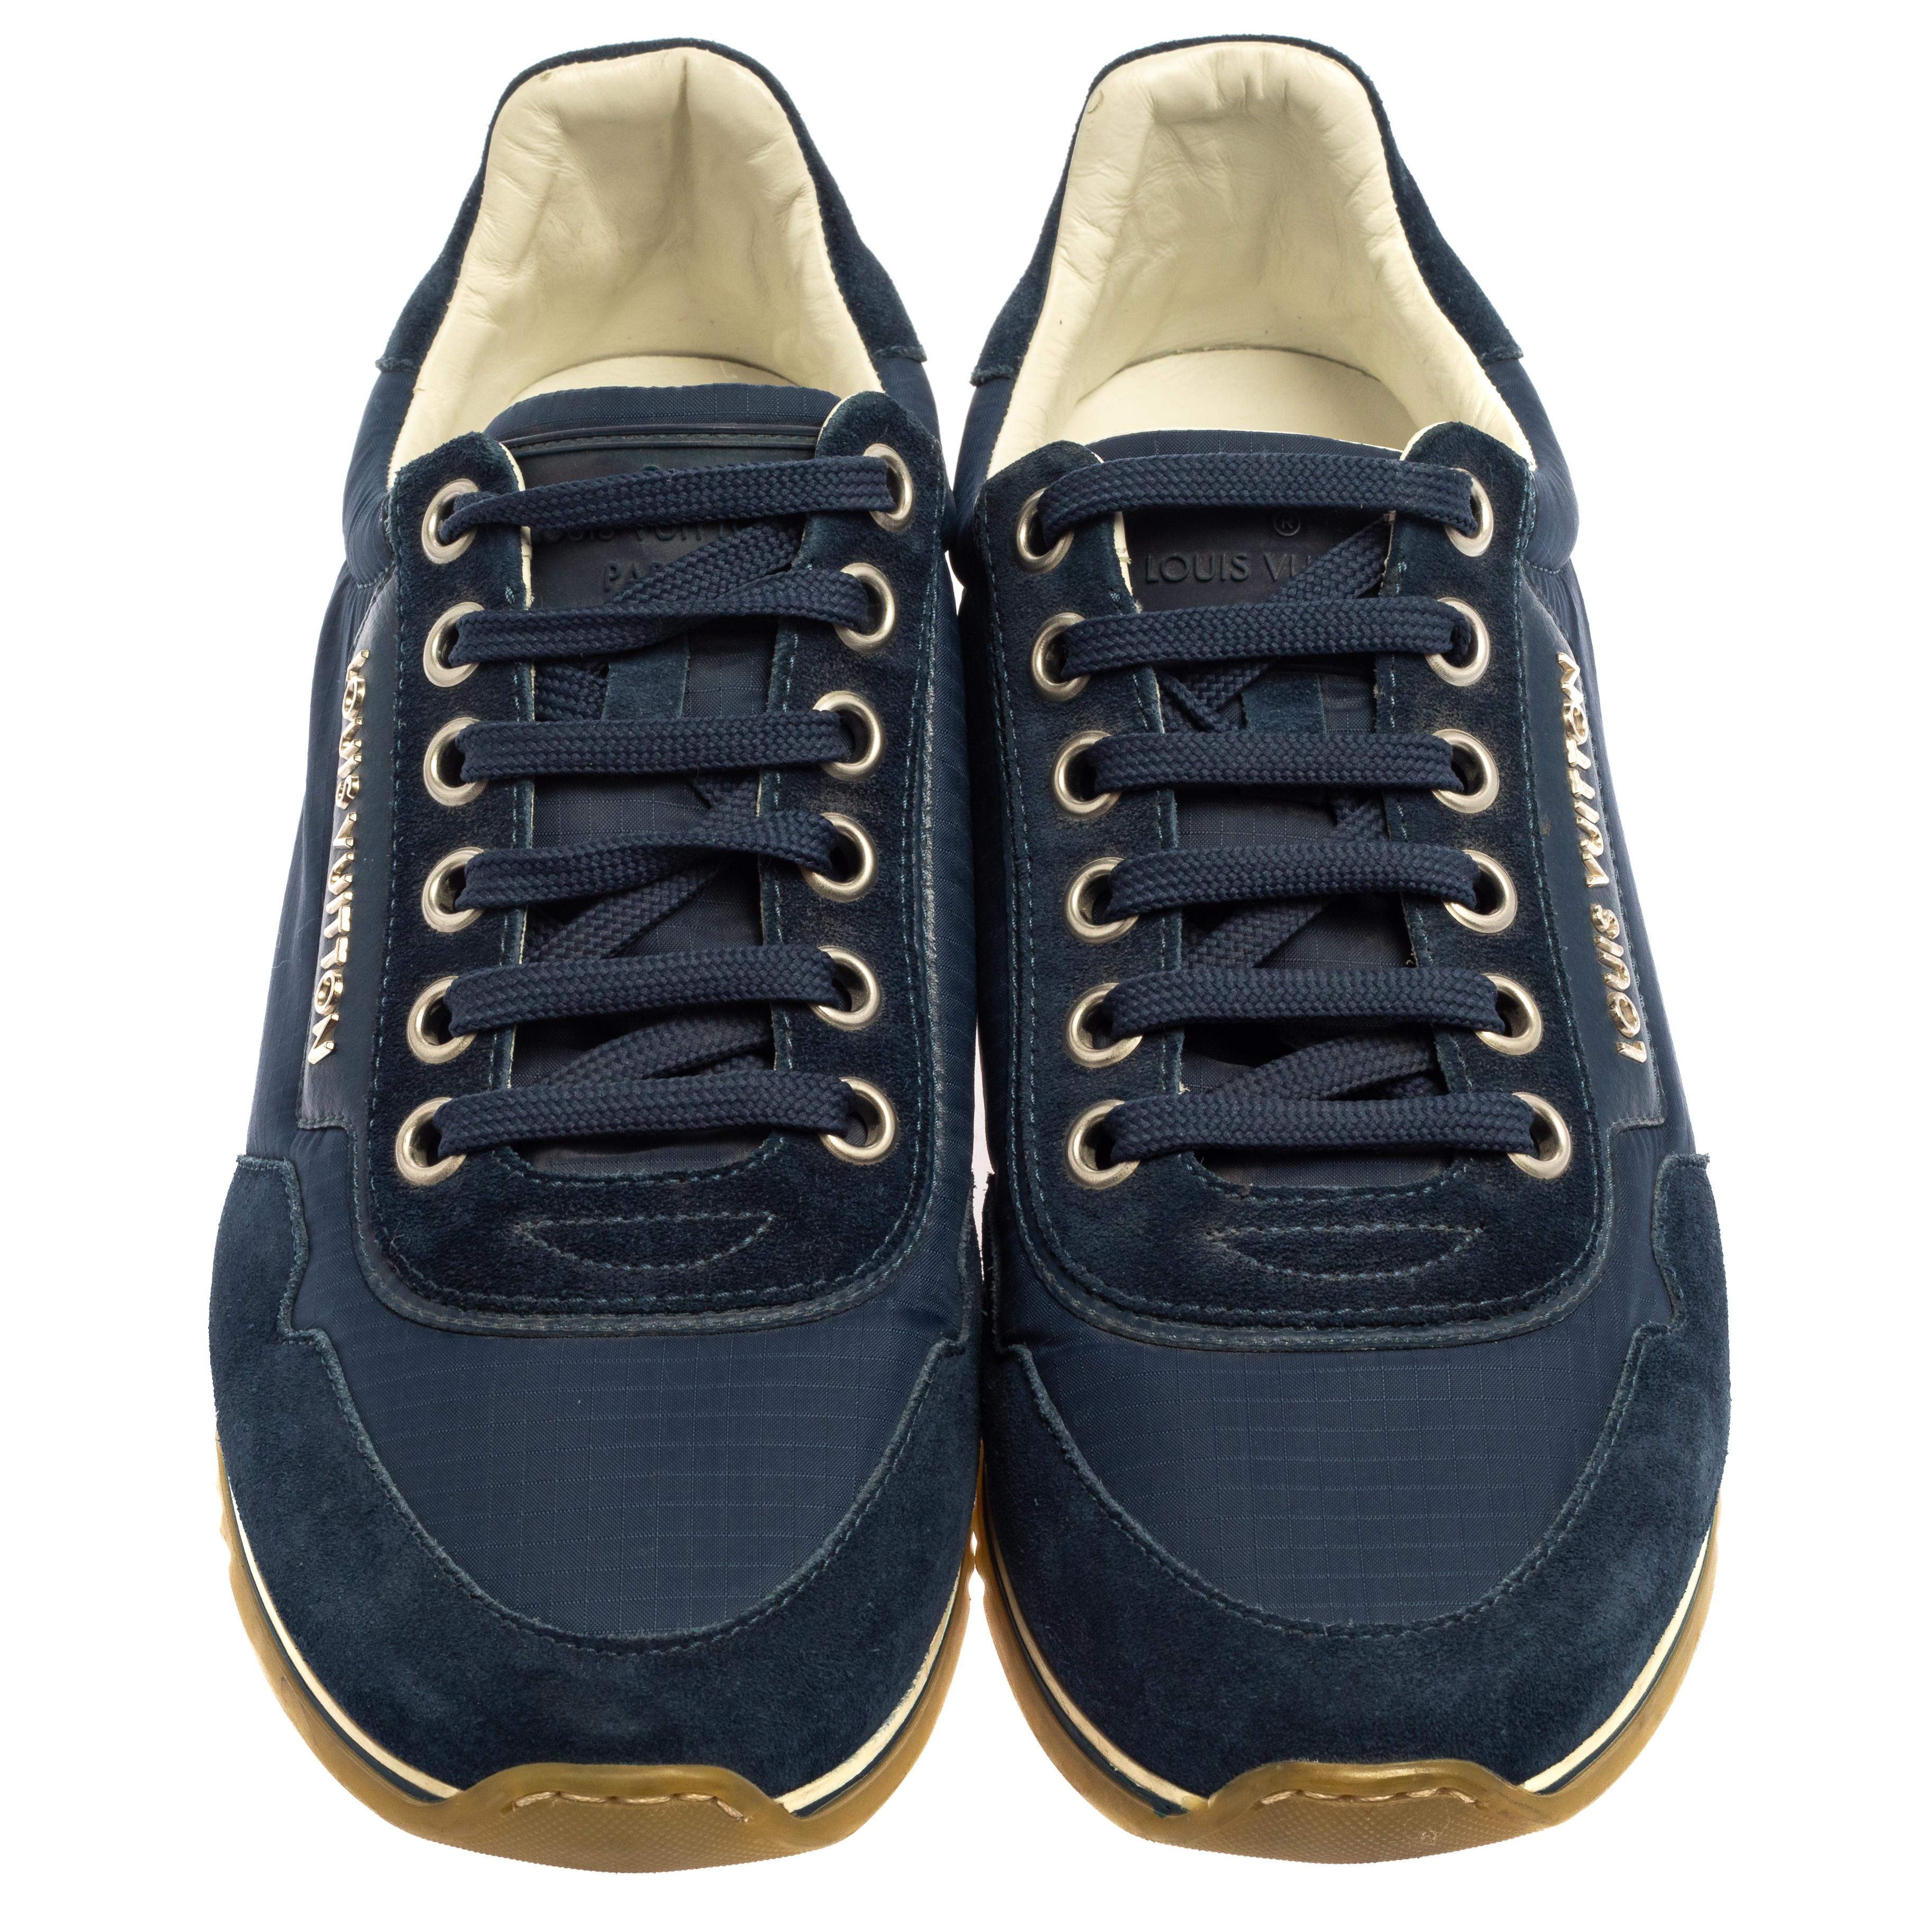 This classy and casual pair of low-top sneakers from Louis Vuitton is a must-have! They are made from plush suede & nylon and come in a lovely shade of blue. It flaunts the logo on the sides, lace-ups on the vamps, and is complete with rubber